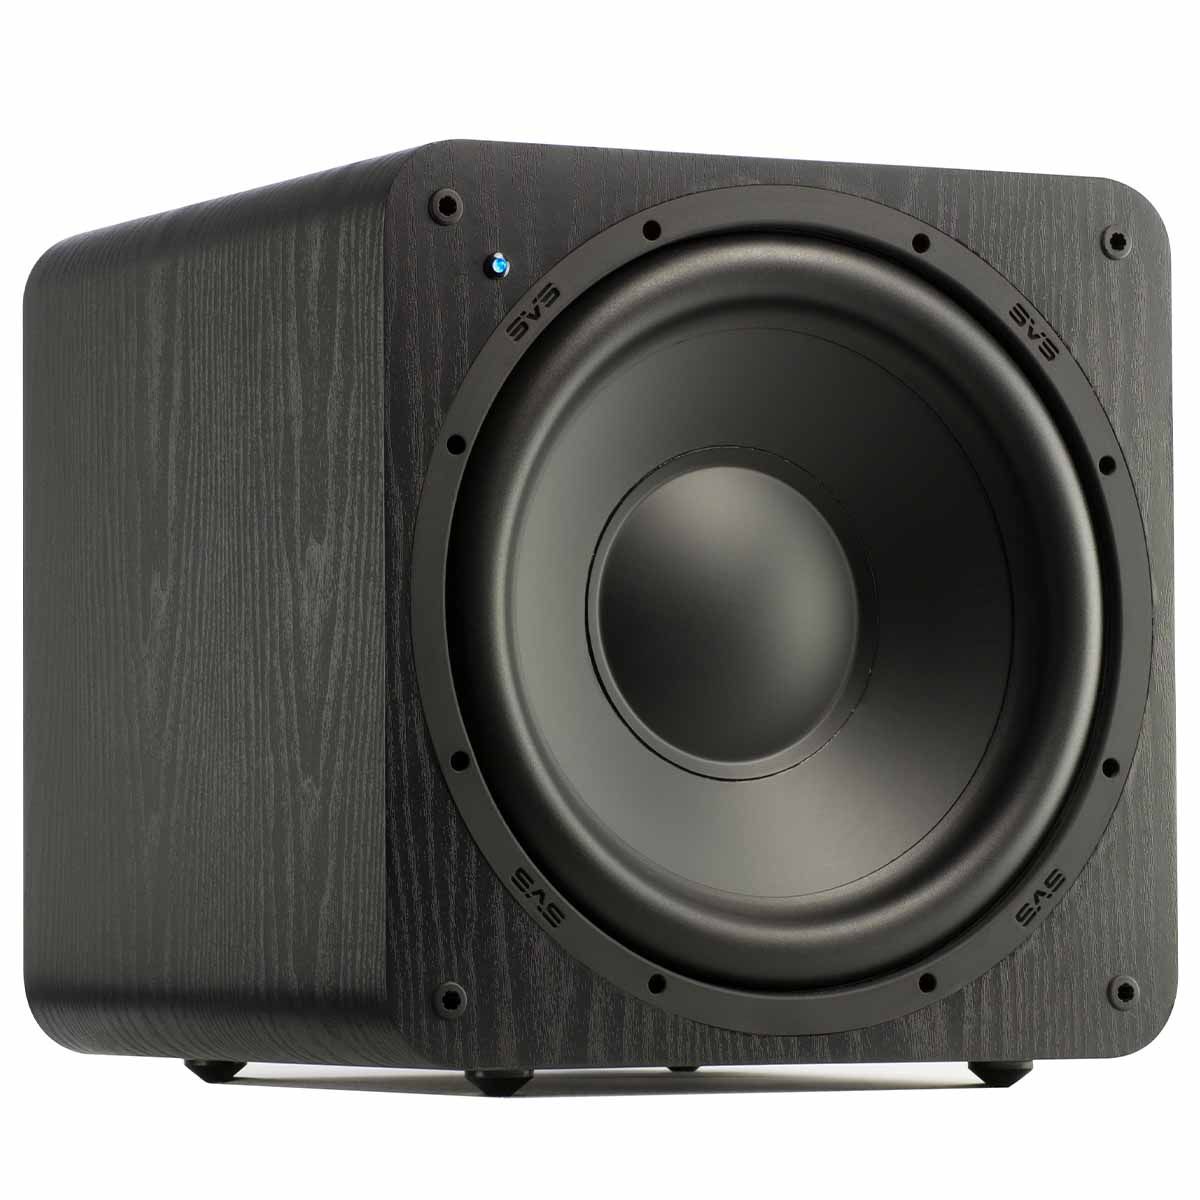 SVS SB-1000 12" Ultra Compact Sealed Subwoofer - angled front view without grille